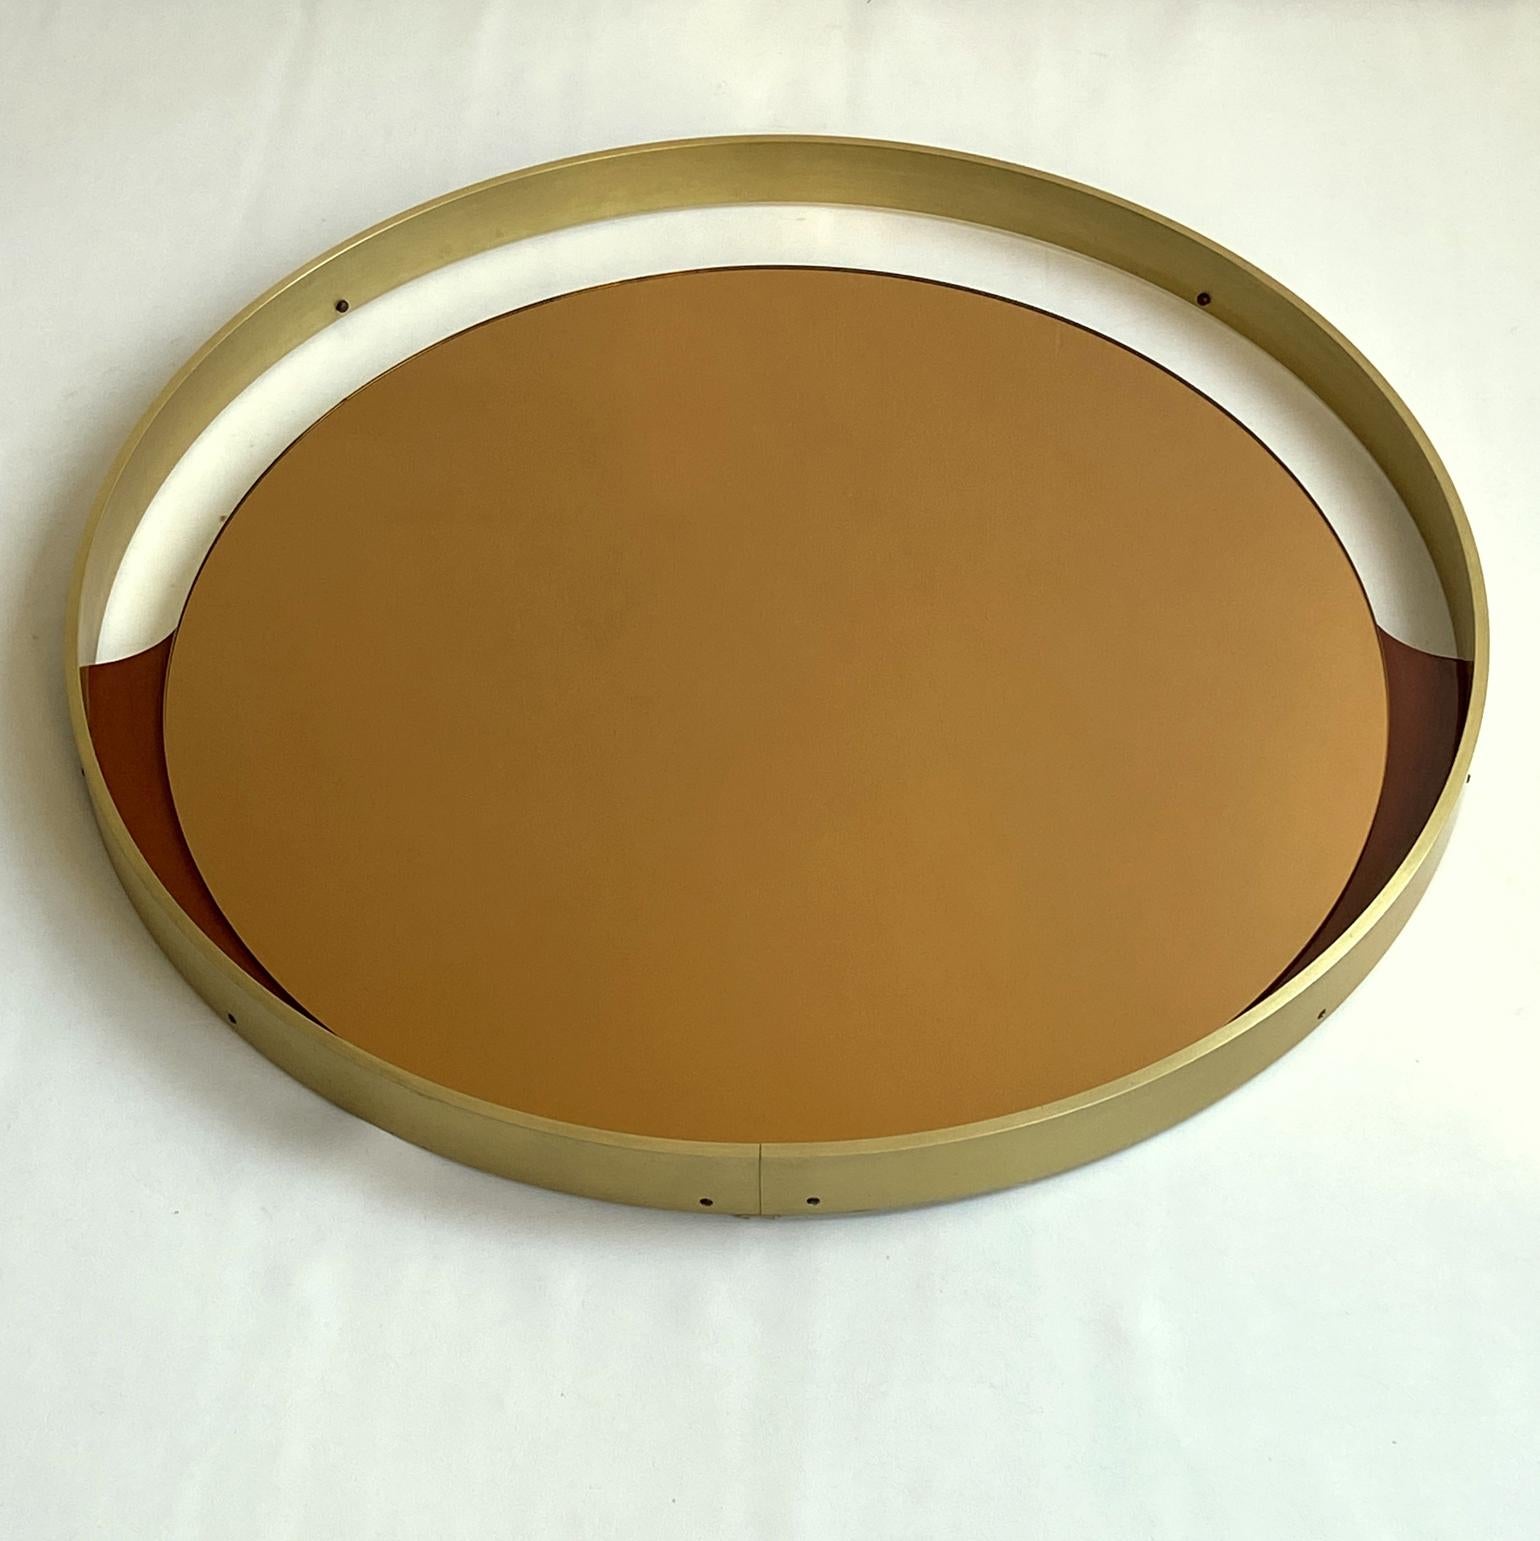 Minimalist Tinted Bronze Round Mirror by Rimadesio Italy 1970s For Sale 1